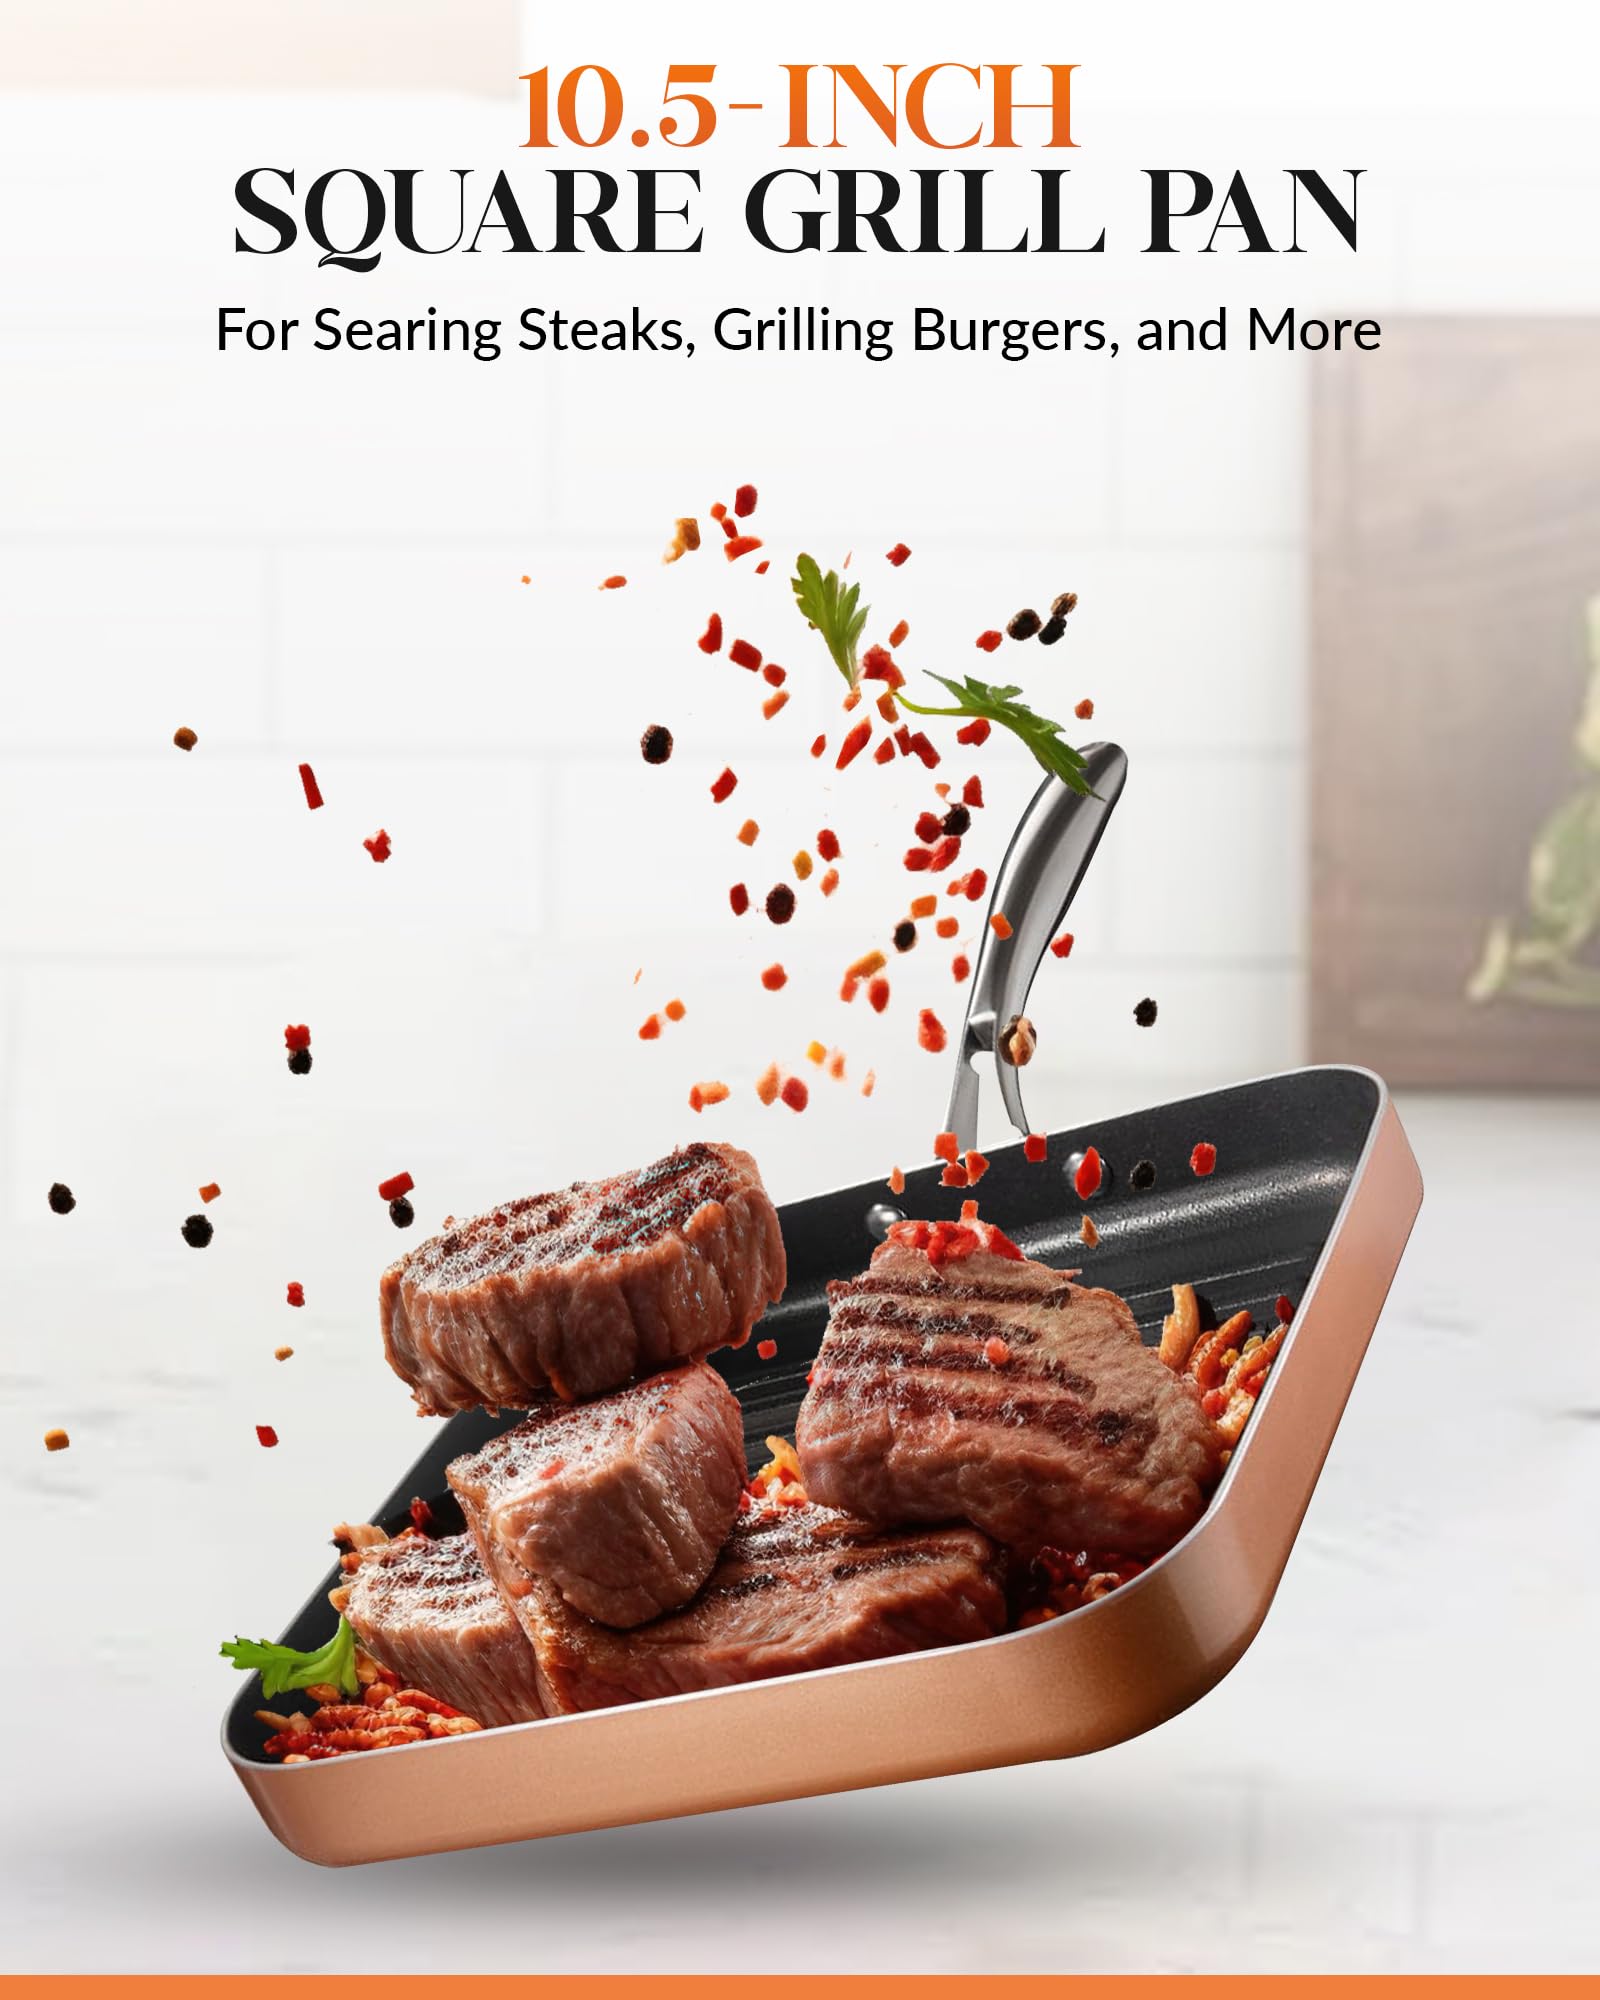 GOTHAM STEEL Nonstick Grill Pan for Stove Top with Grill Sear Ridges, Nonstick Ultra Durable Grilling Pan, Metal Utensil Safe, Stay Cool Stainless-Steel Handle, Oven & Dishwasher Safe, Non-Toxic